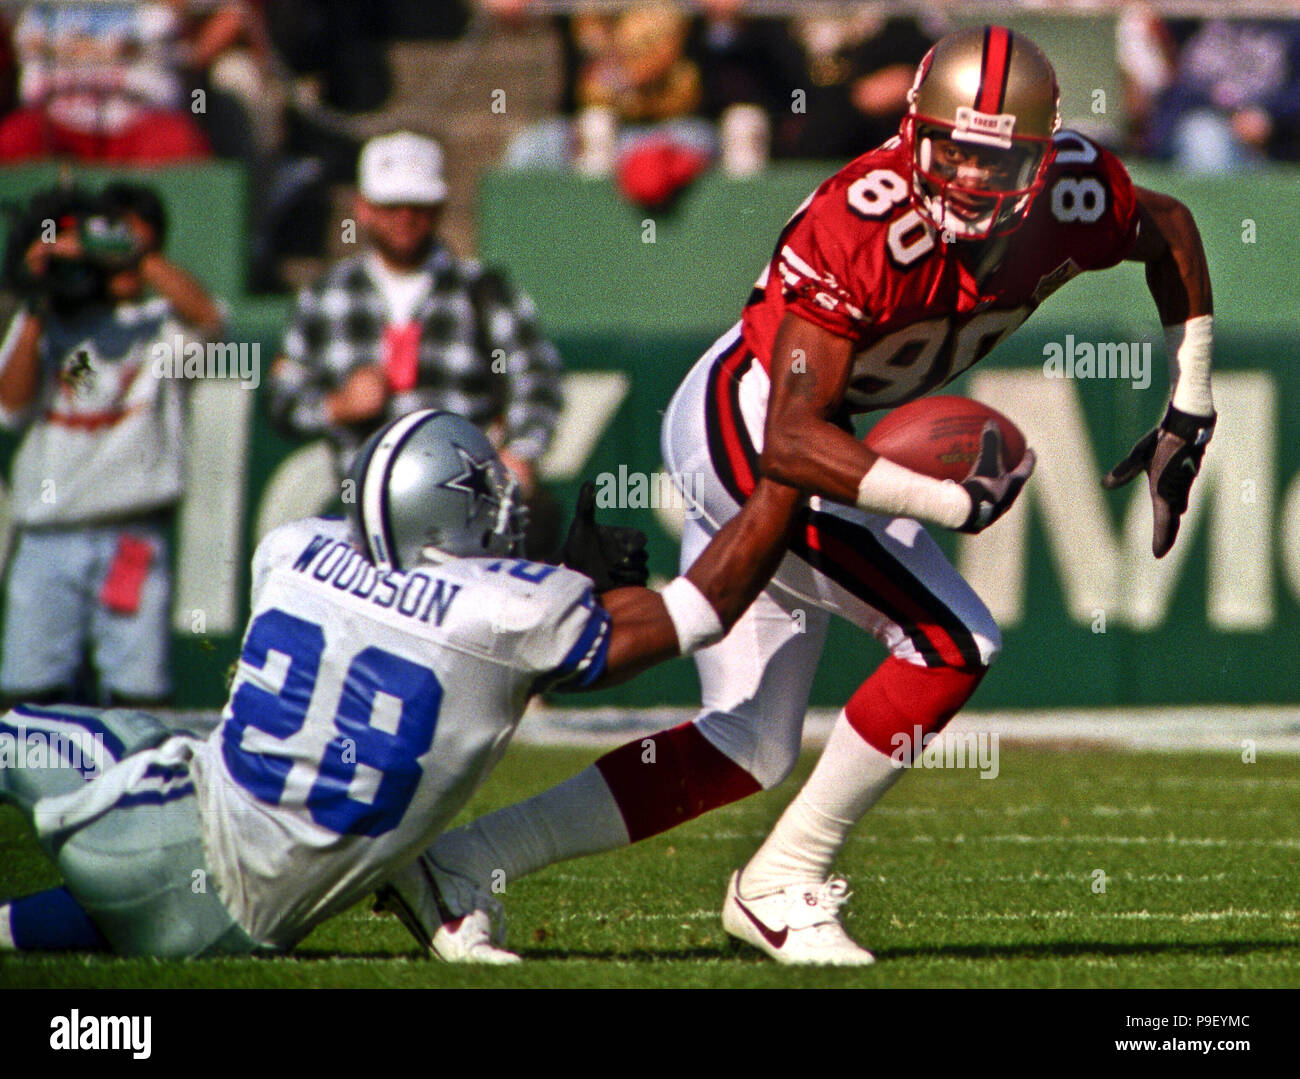 Darren woodson hi-res stock photography and images - Alamy